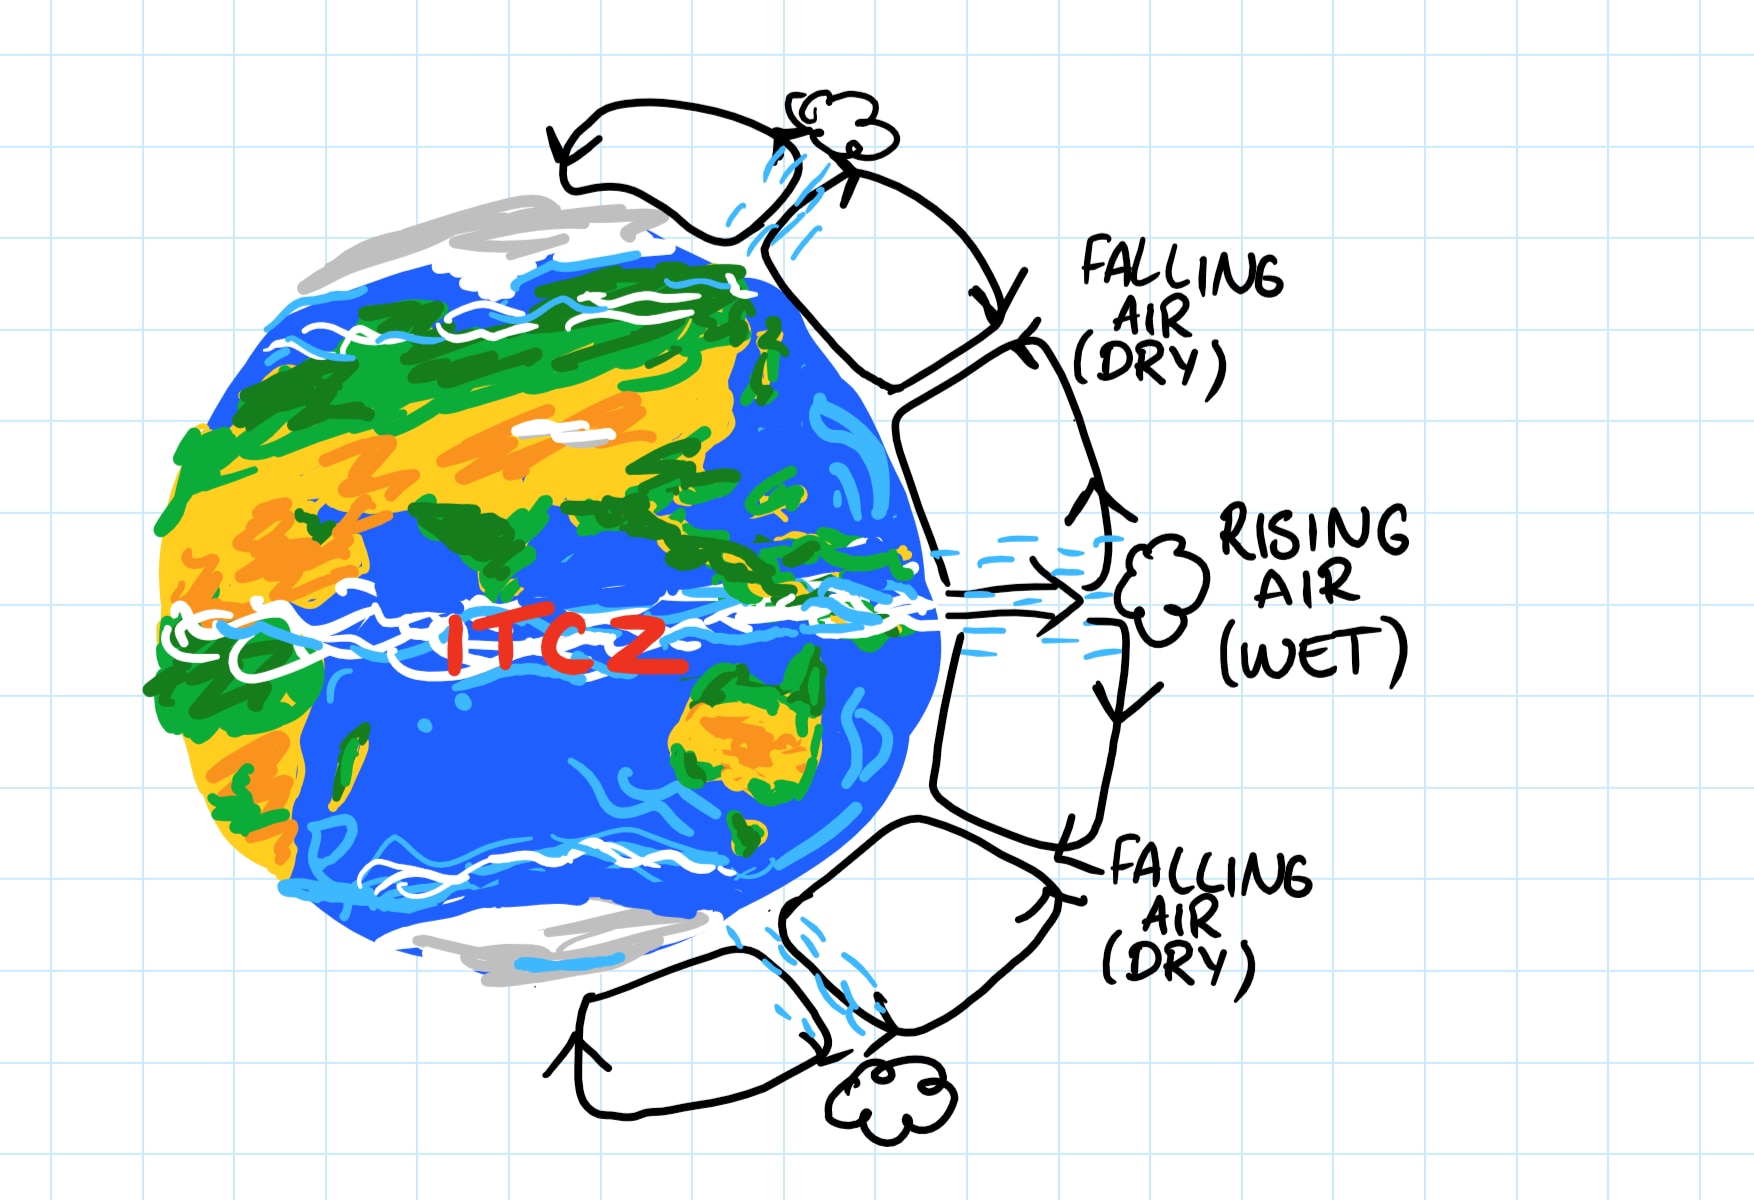 Awesome hand drawn graphic of the earth and the sun showing the air rising around the equator